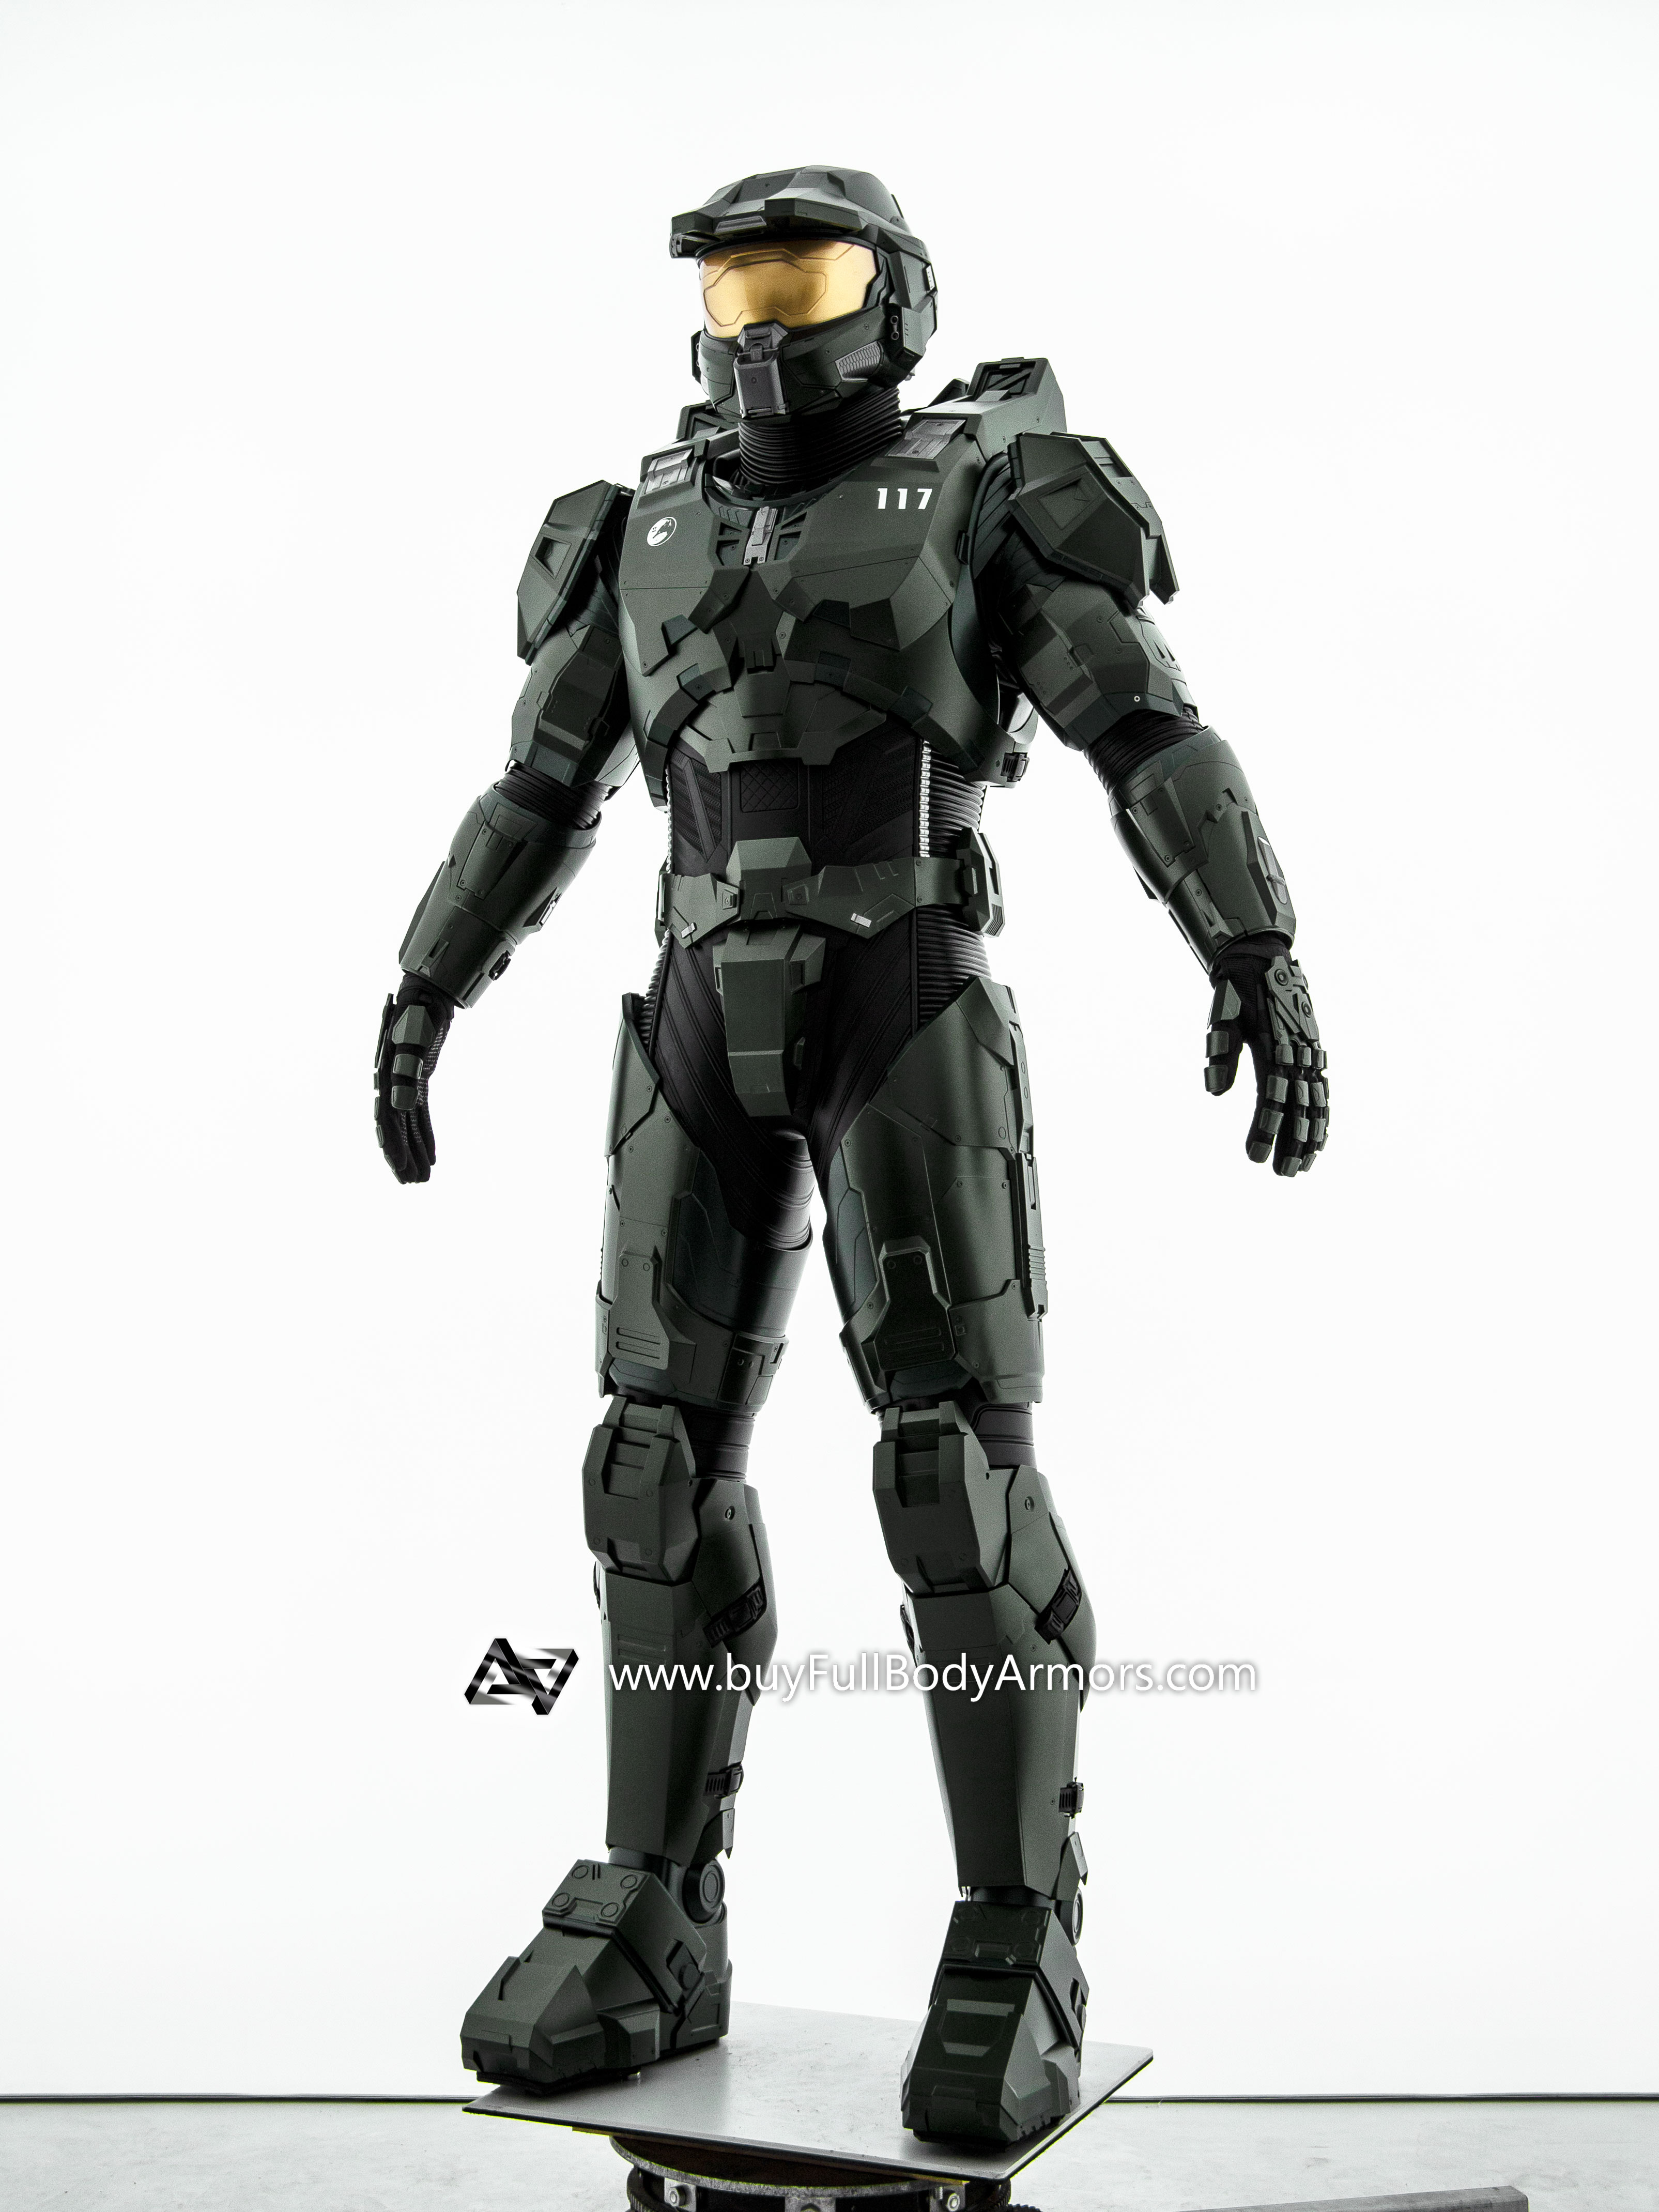 Wearable MASTER CHIEF ARMOR SUIT (Halo Infinity and Halo TV Series Season 2 Version) 1